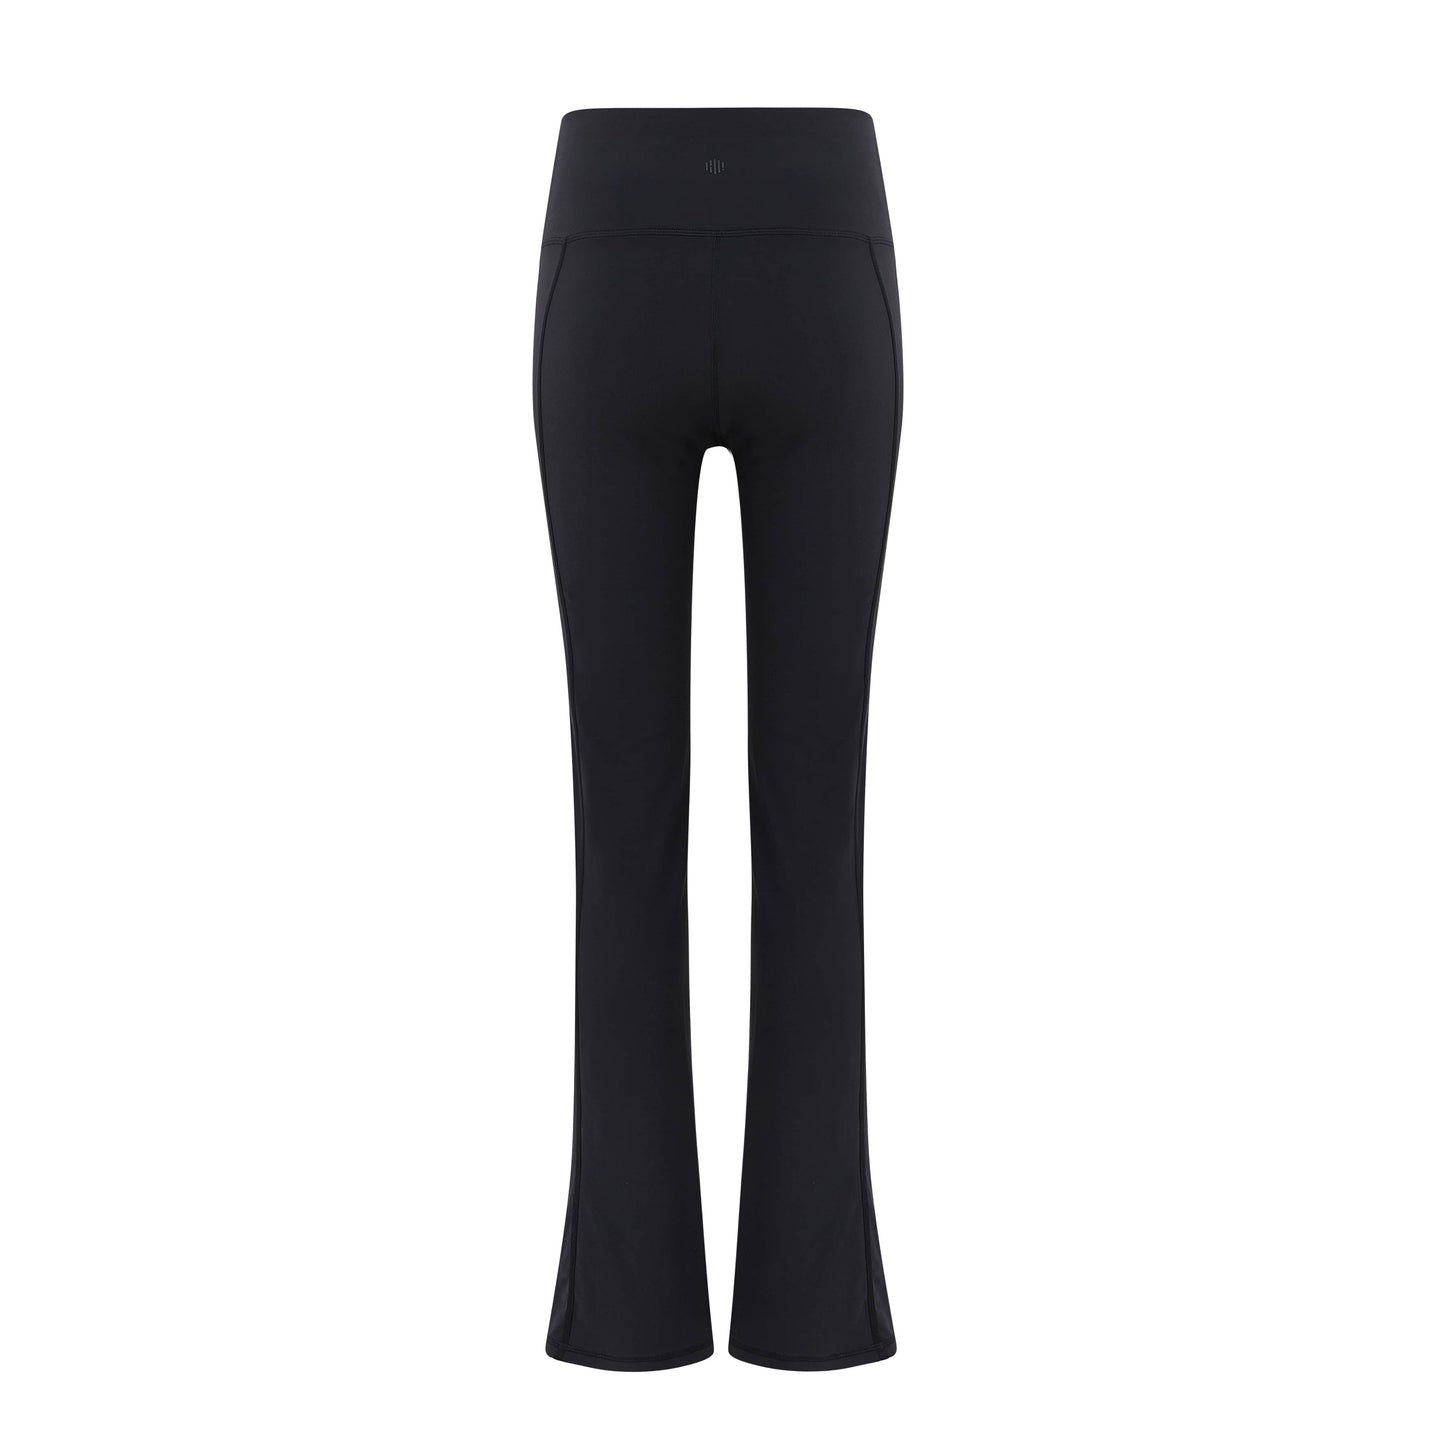 a navy flare leggings from back